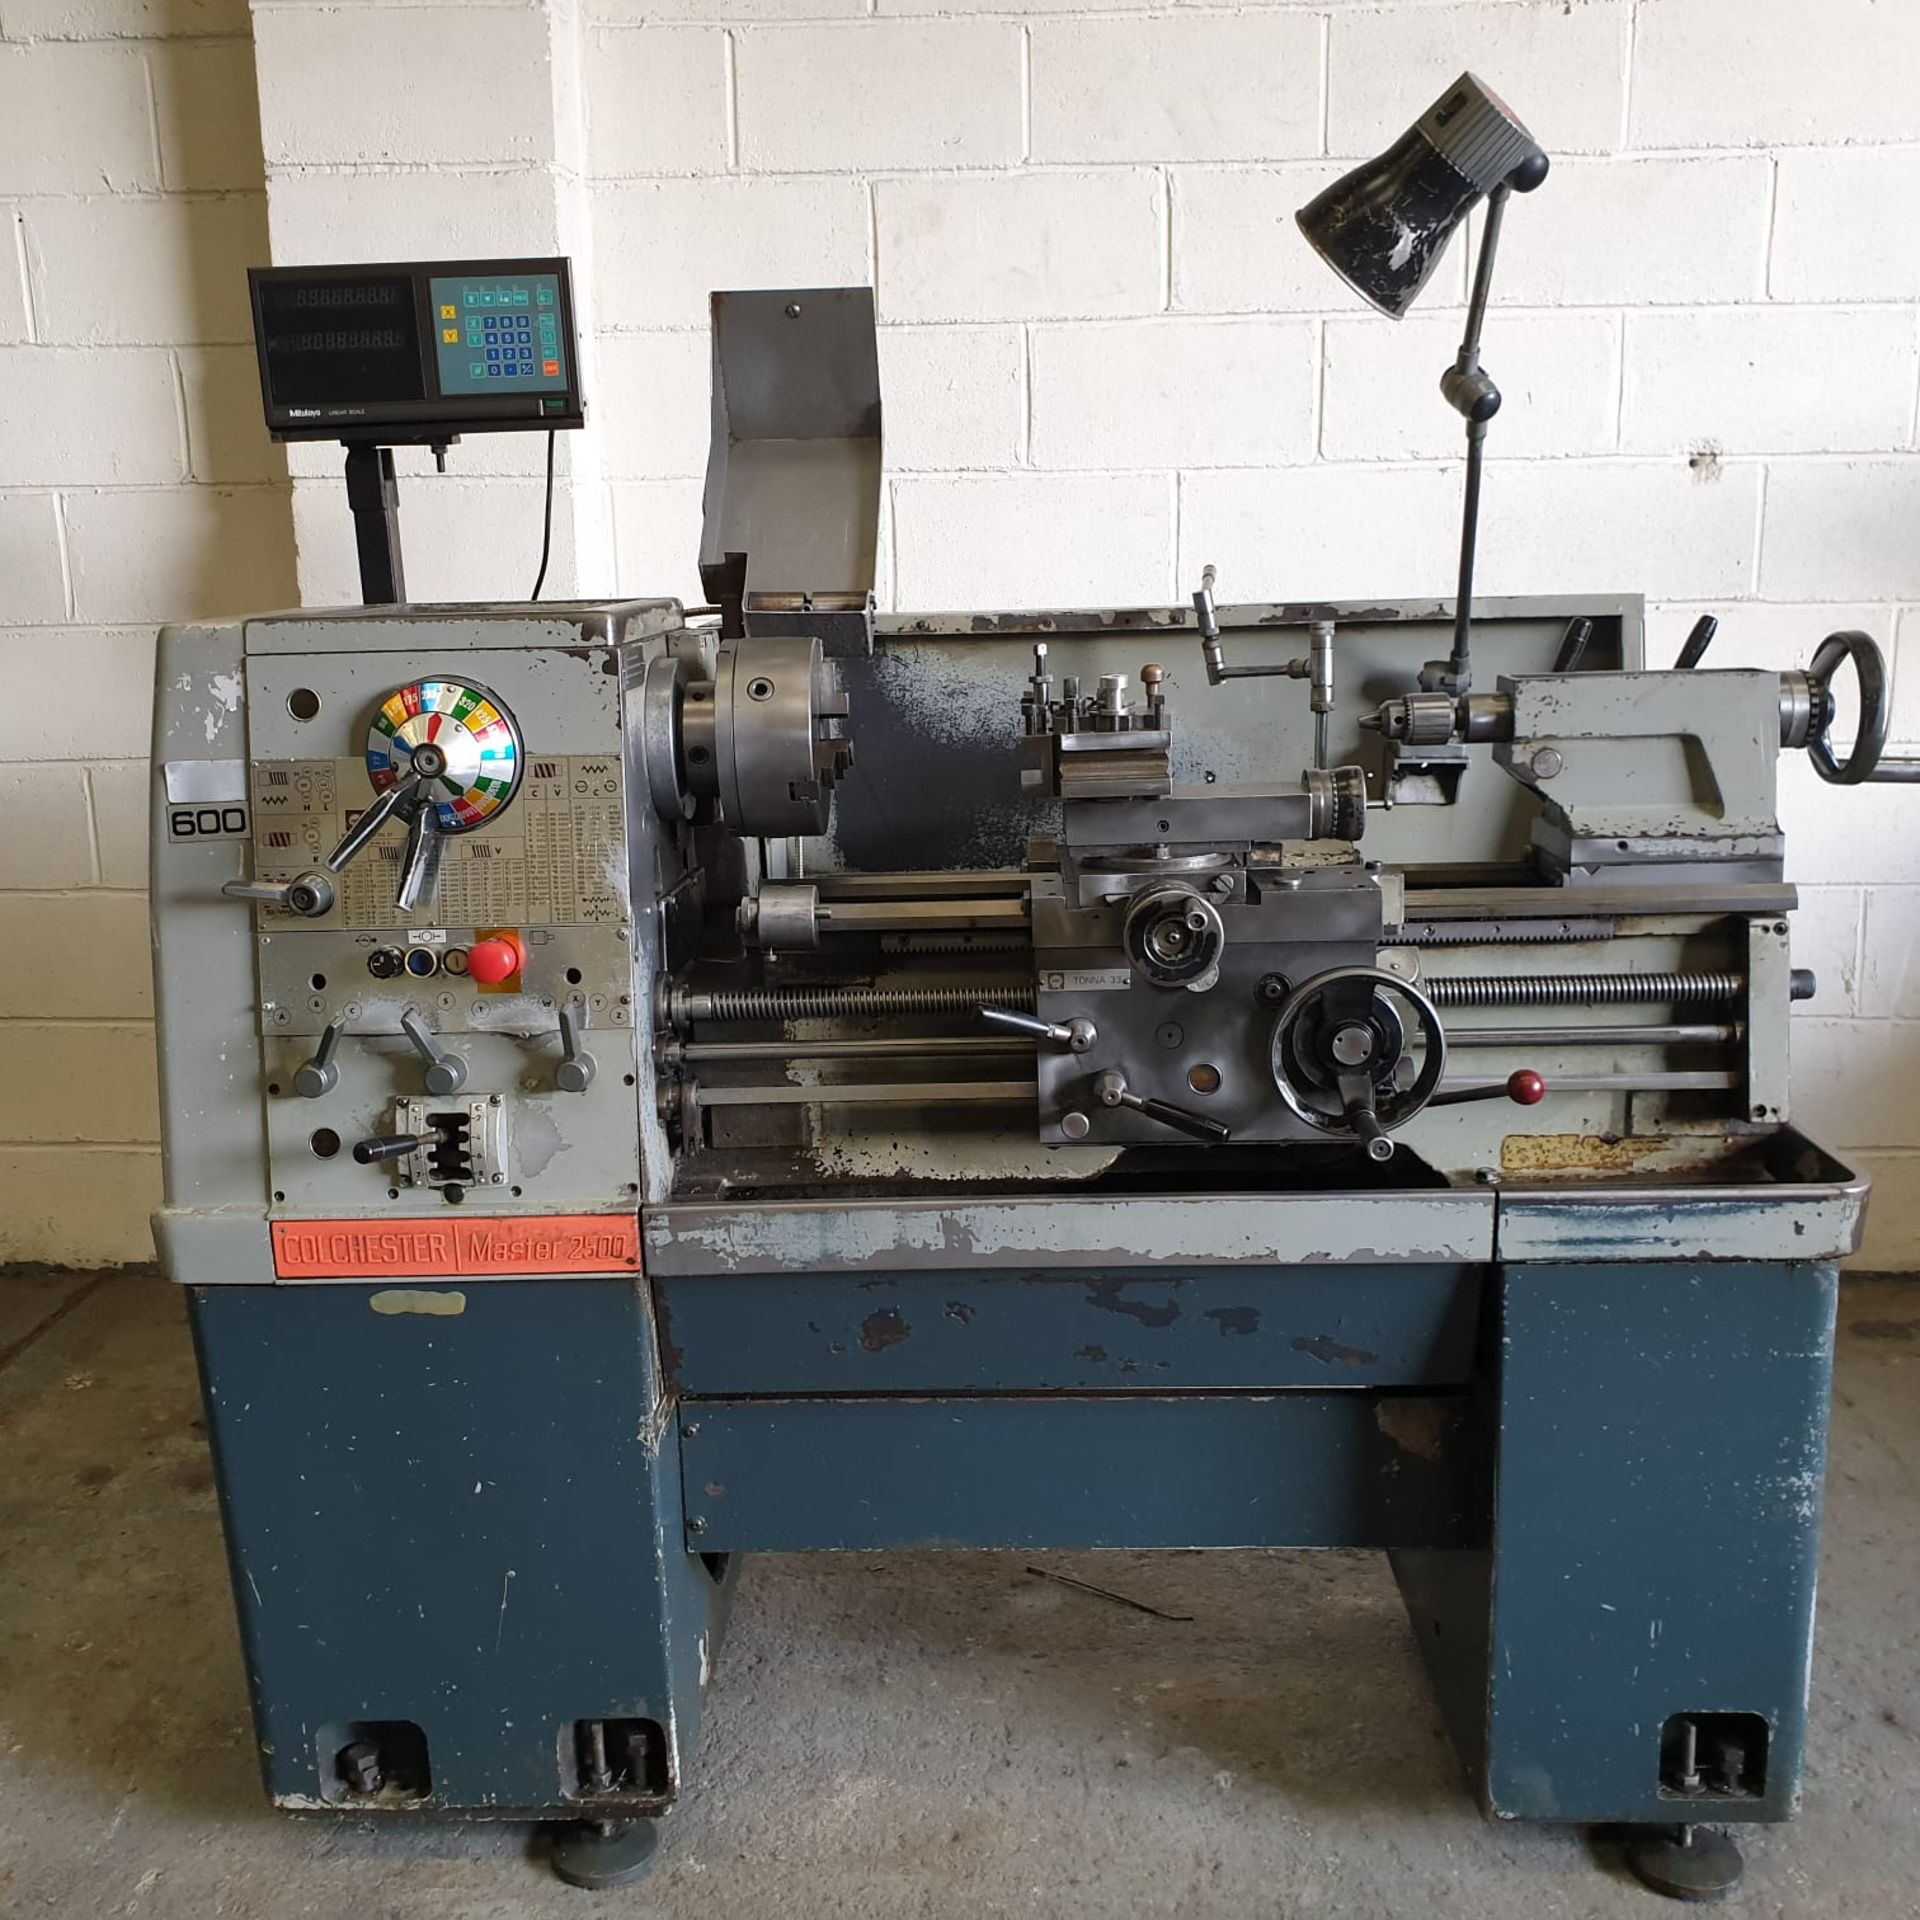 Colchester Master 2500. Gap Bed Centre Lathe. Distance Between Centres 25". Swing Over Bed 13 1/4".